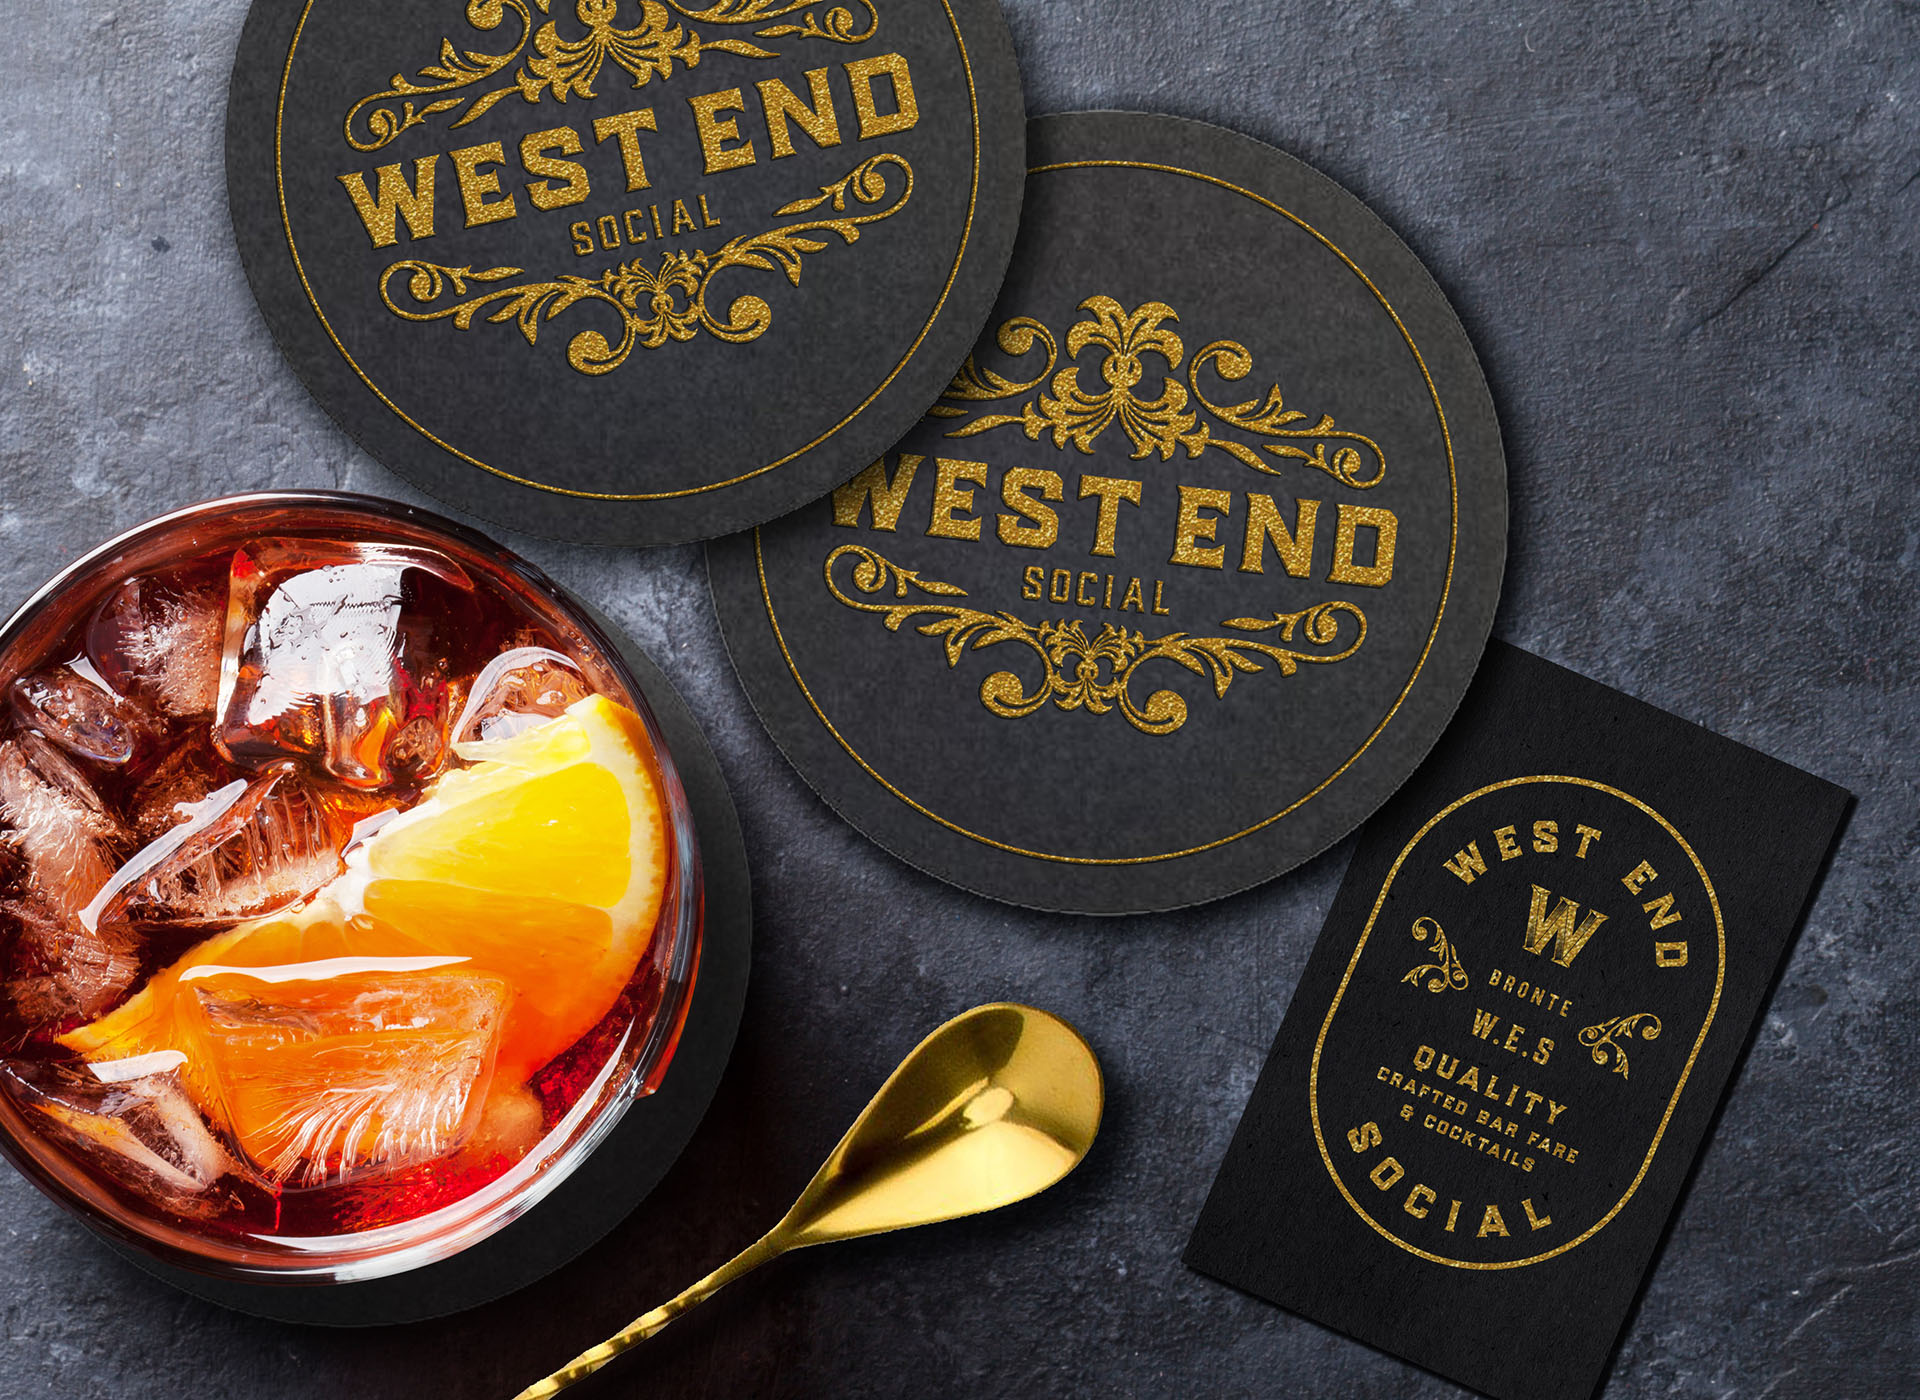 Cocktail, coasters, and business card for West End Social on to of a stone table